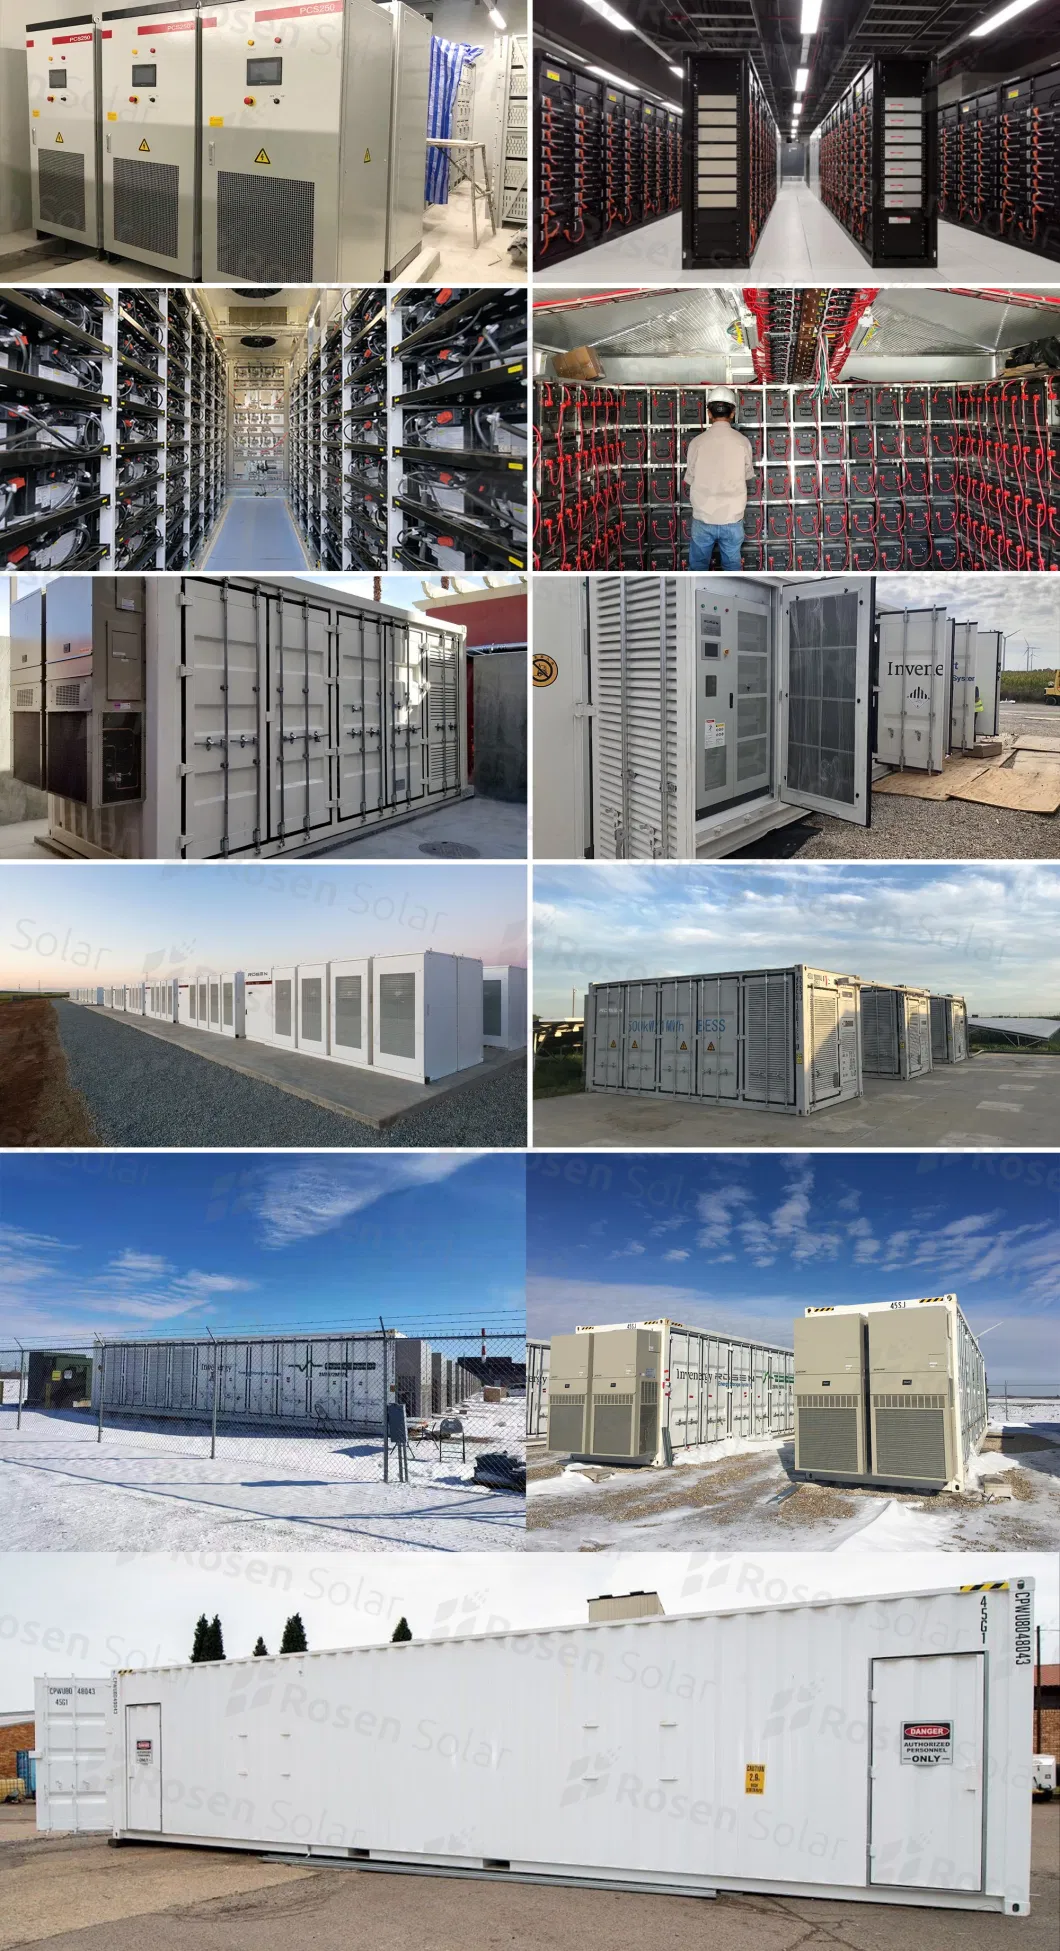 Hot Sale 1000 1500 2000 2500 Kwh 20FT 40FT Container Solar Energy Storage System